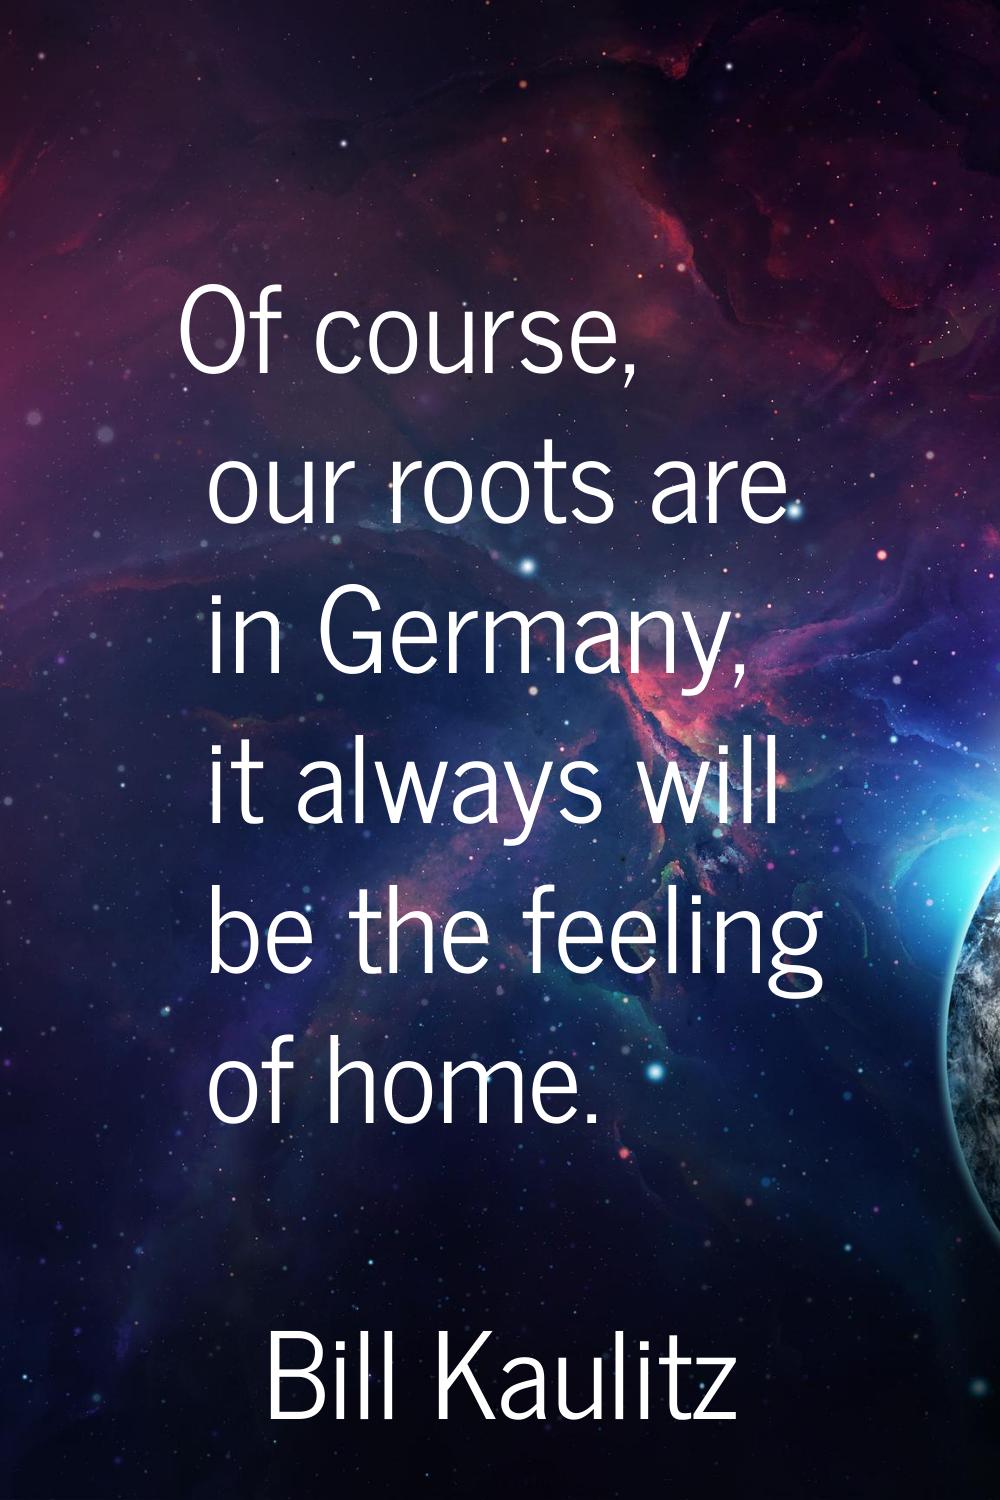 Of course, our roots are in Germany, it always will be the feeling of home.